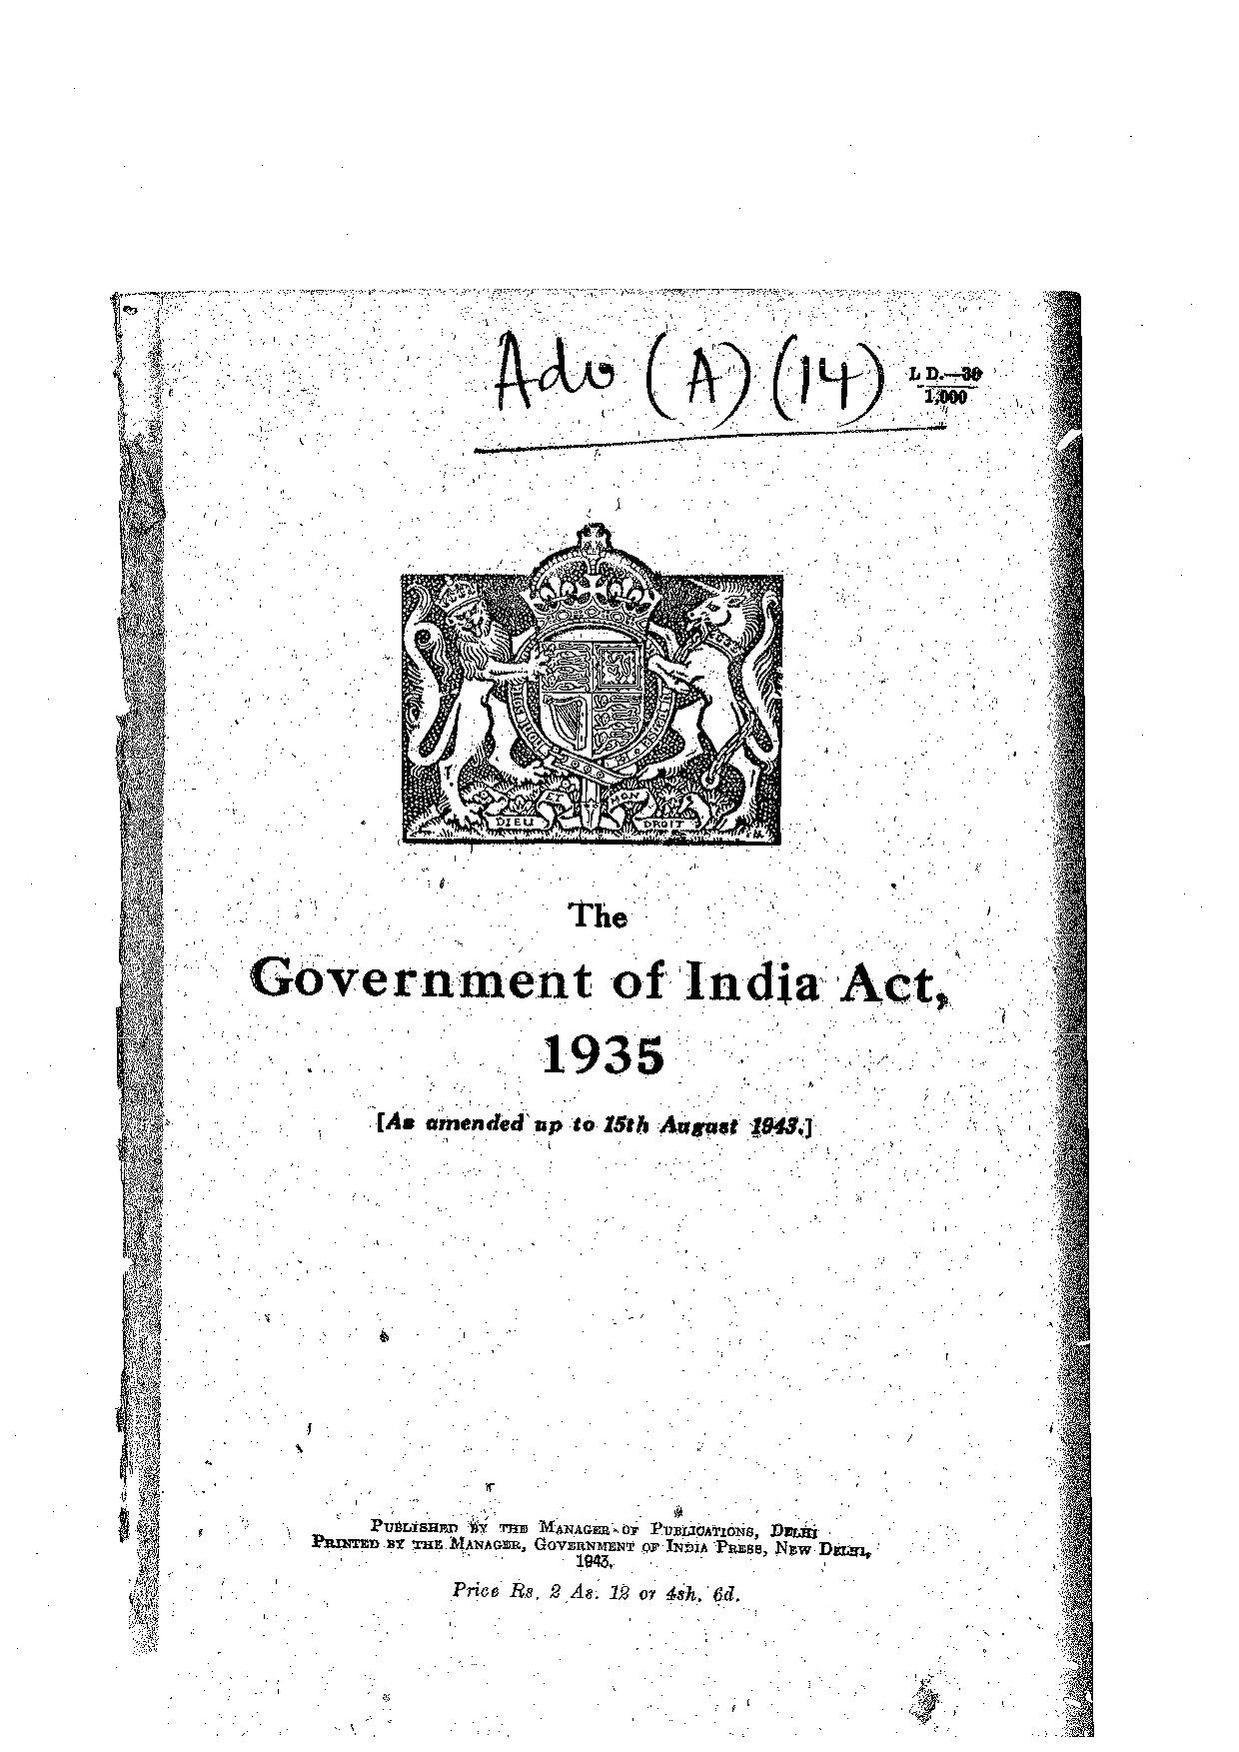 govt of india act 1935